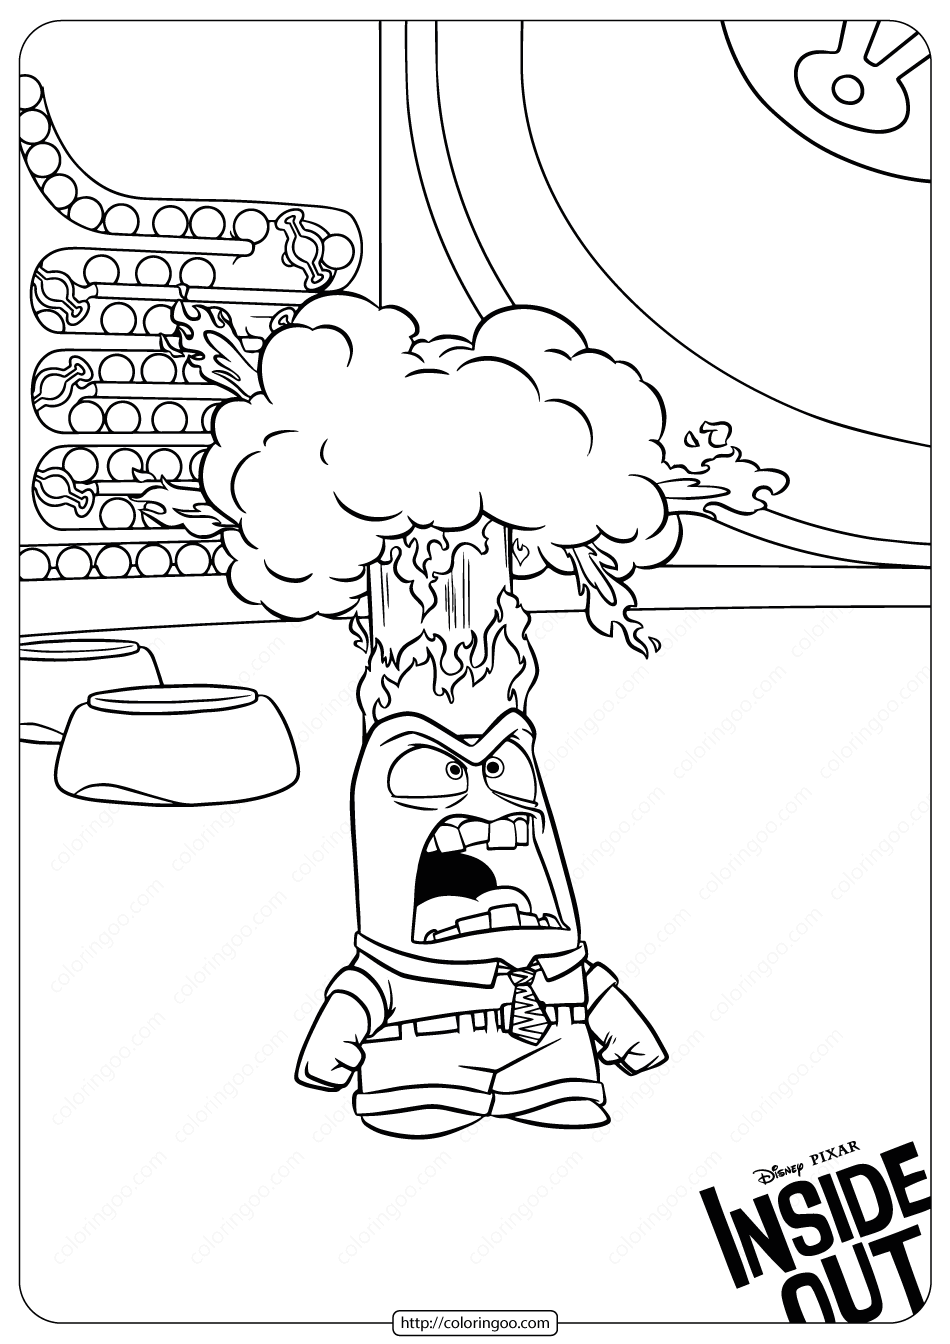 disney inside out anger coloring pages